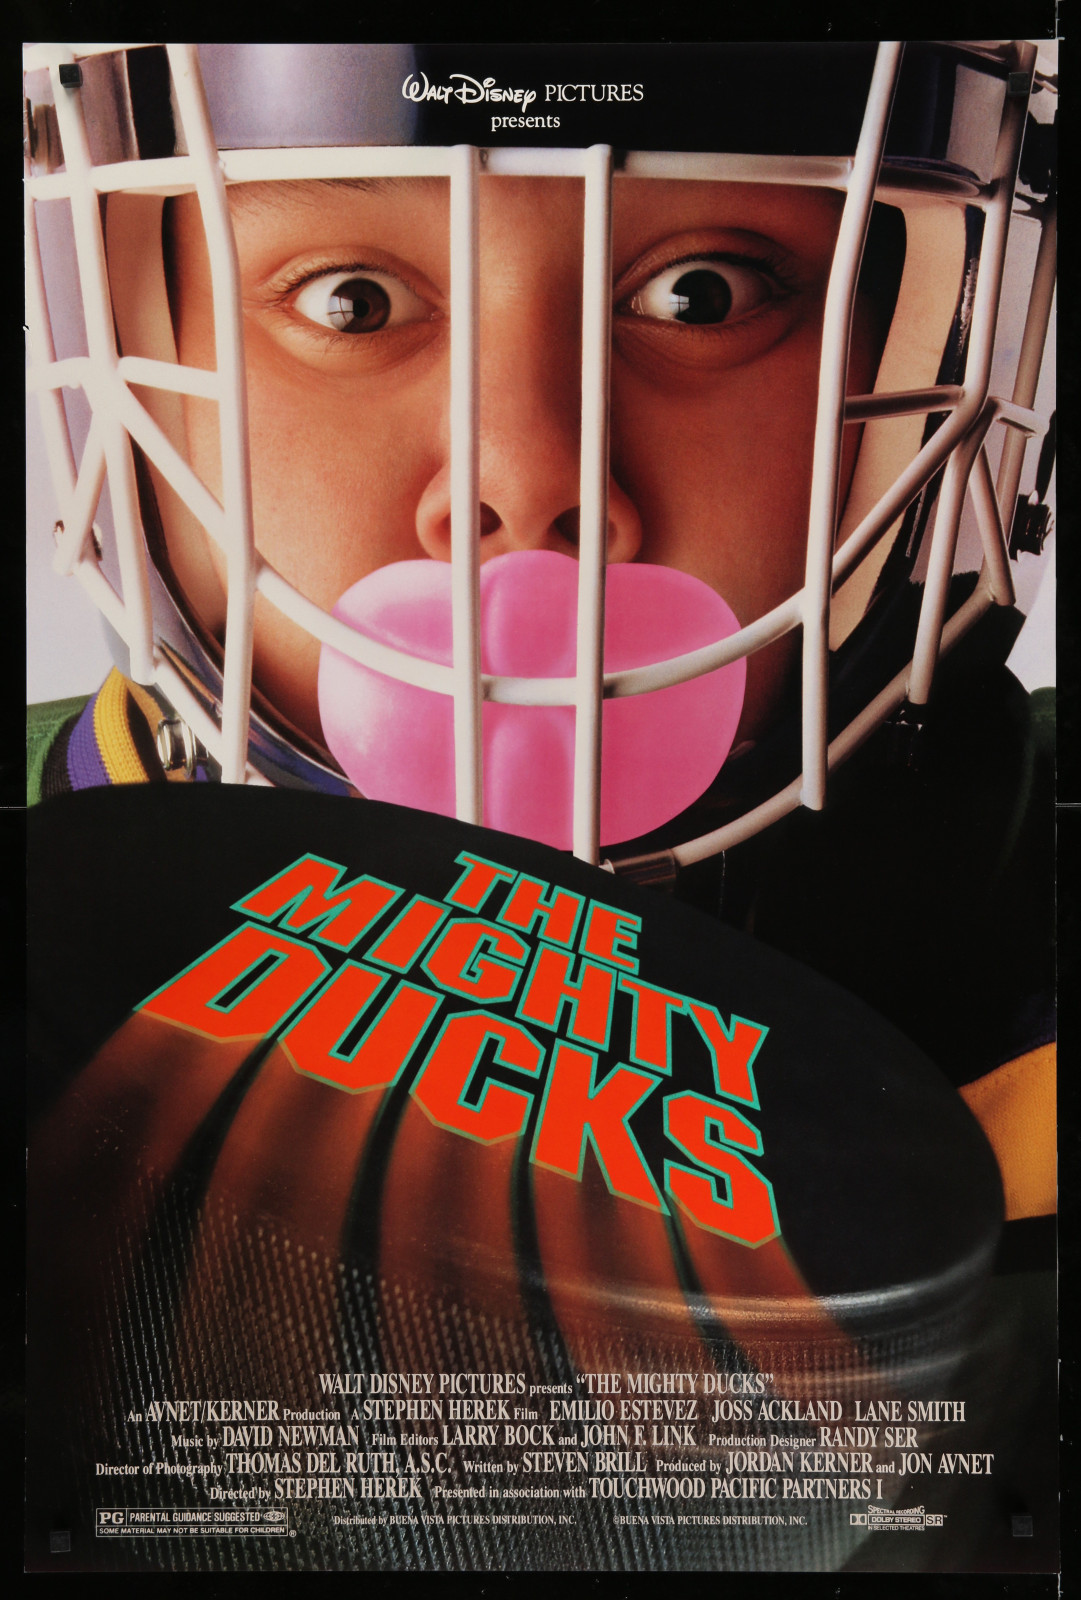 The Mighty Ducks 2A366 A Part Of A Lot 29 Unfolded Double-Sided 27X40 One-Sheets '90S-00S Great Movie Images!